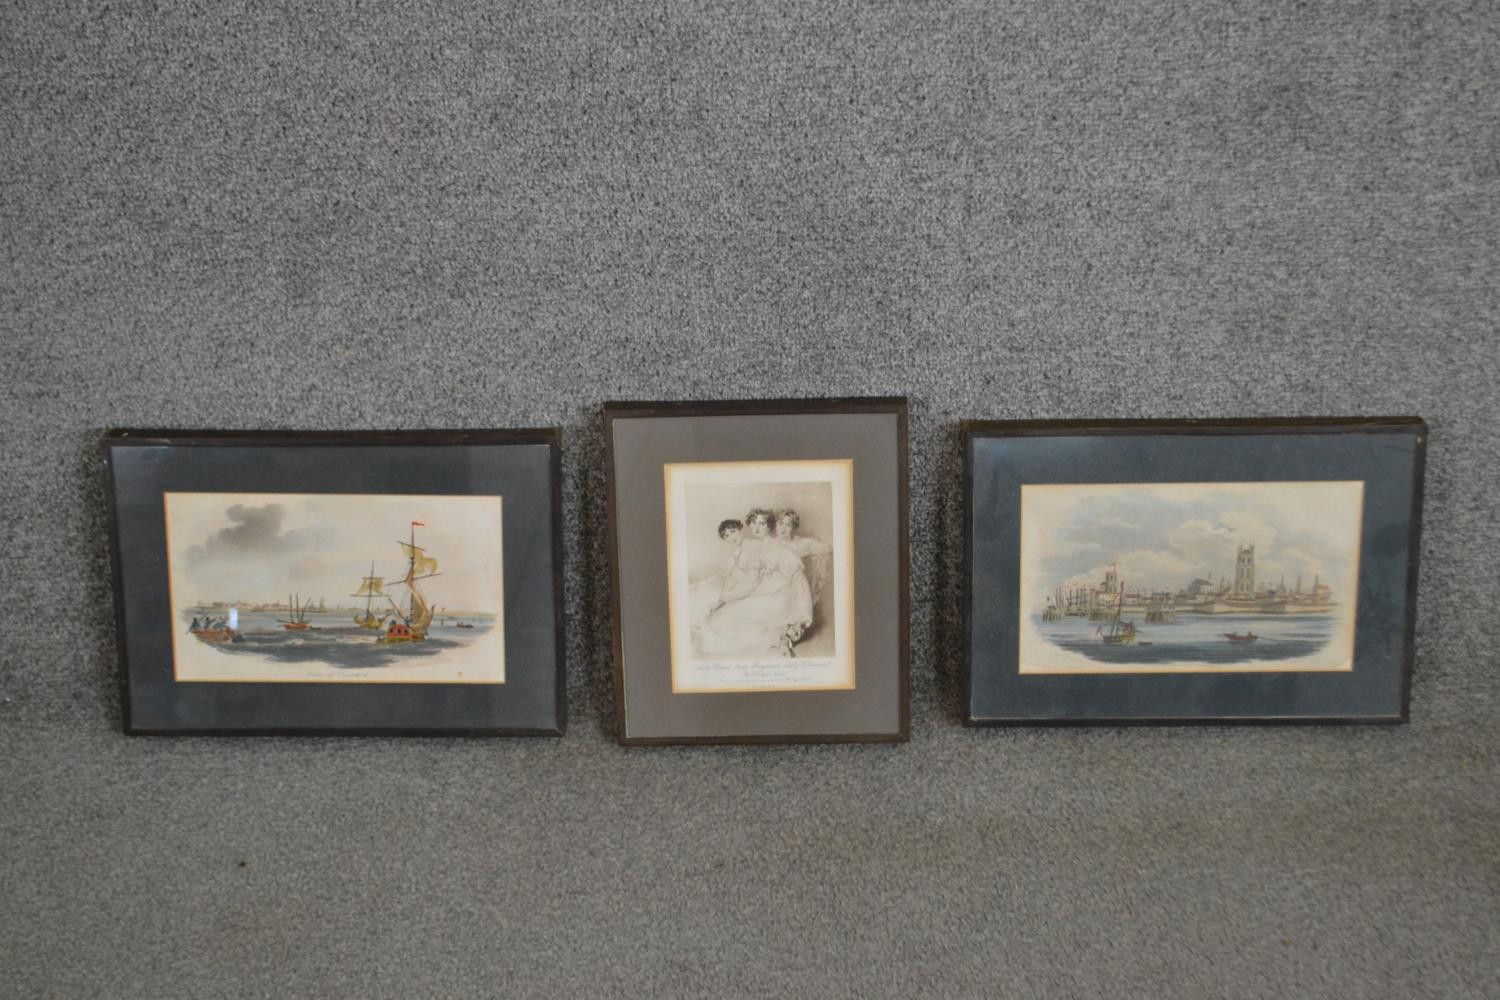 Three framed and glazed hand coloured 19th century engravings including "View of Dunkirk" and "The